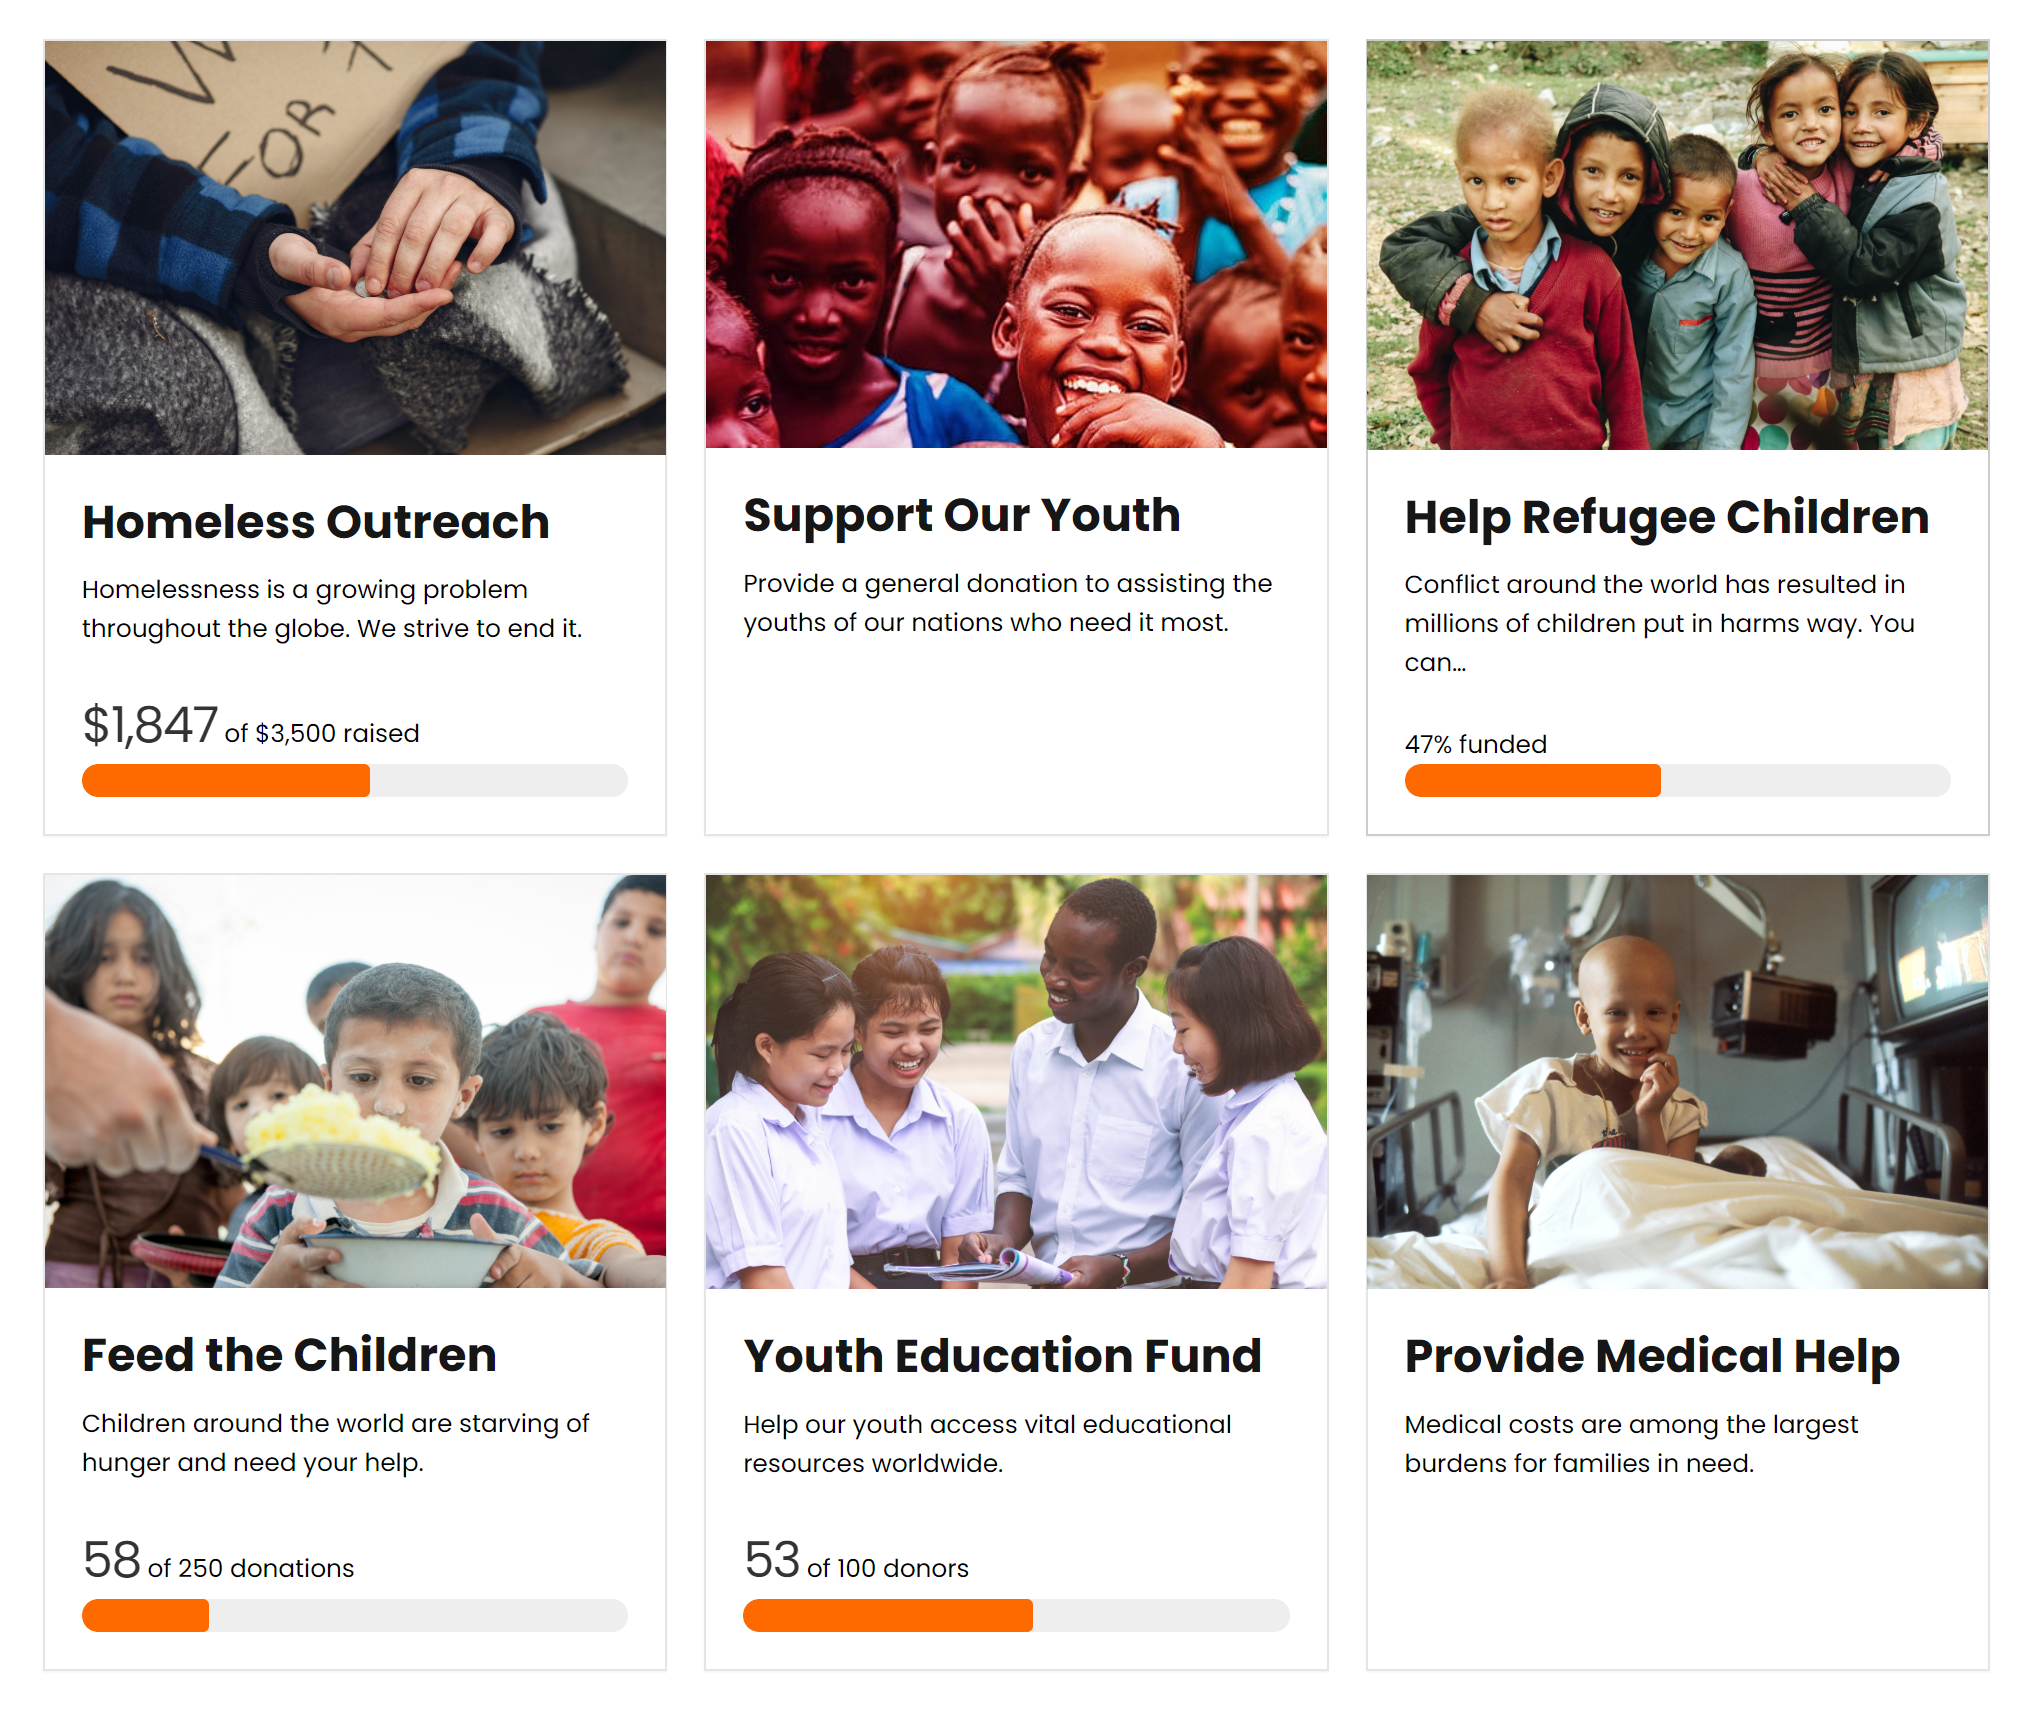 Each piece of the form grid funds a different program and has its own fundraising progress goal bar.